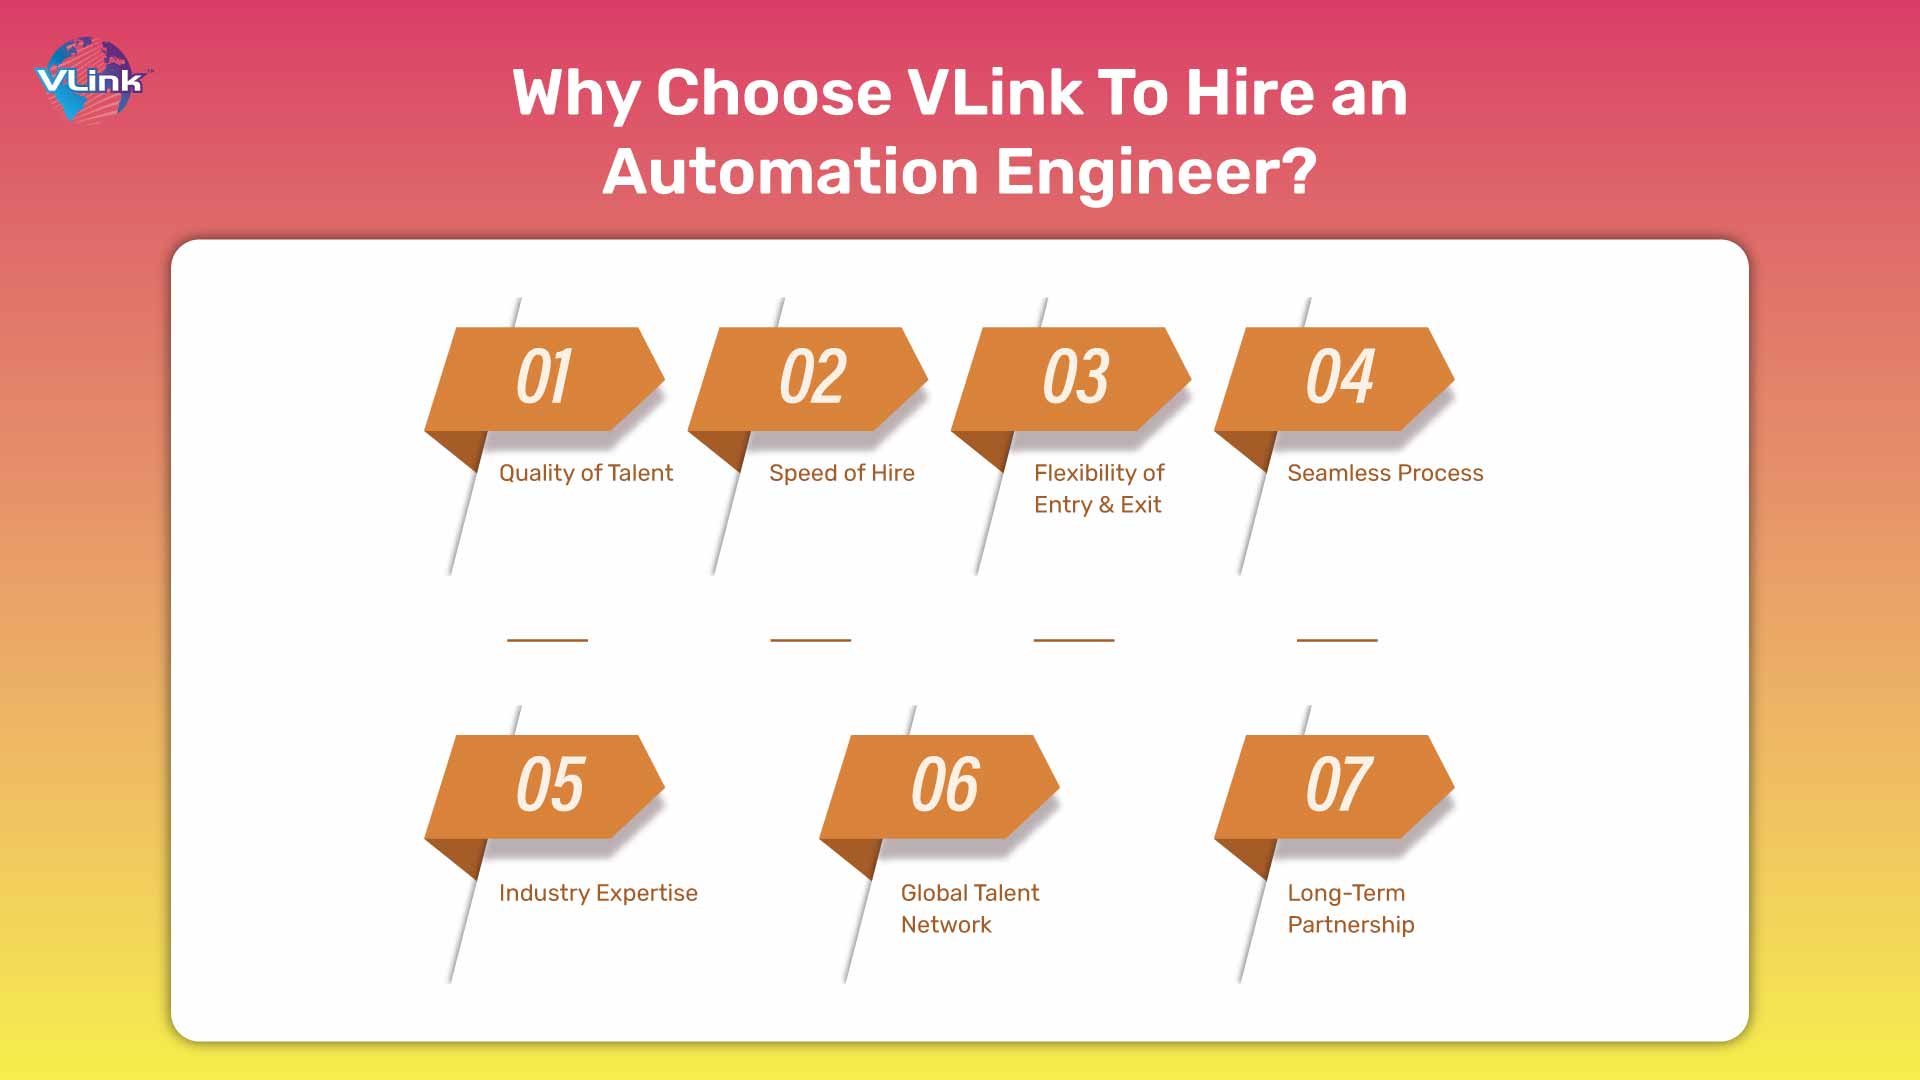 Why Choose VLink To Hire an Automation Engineer